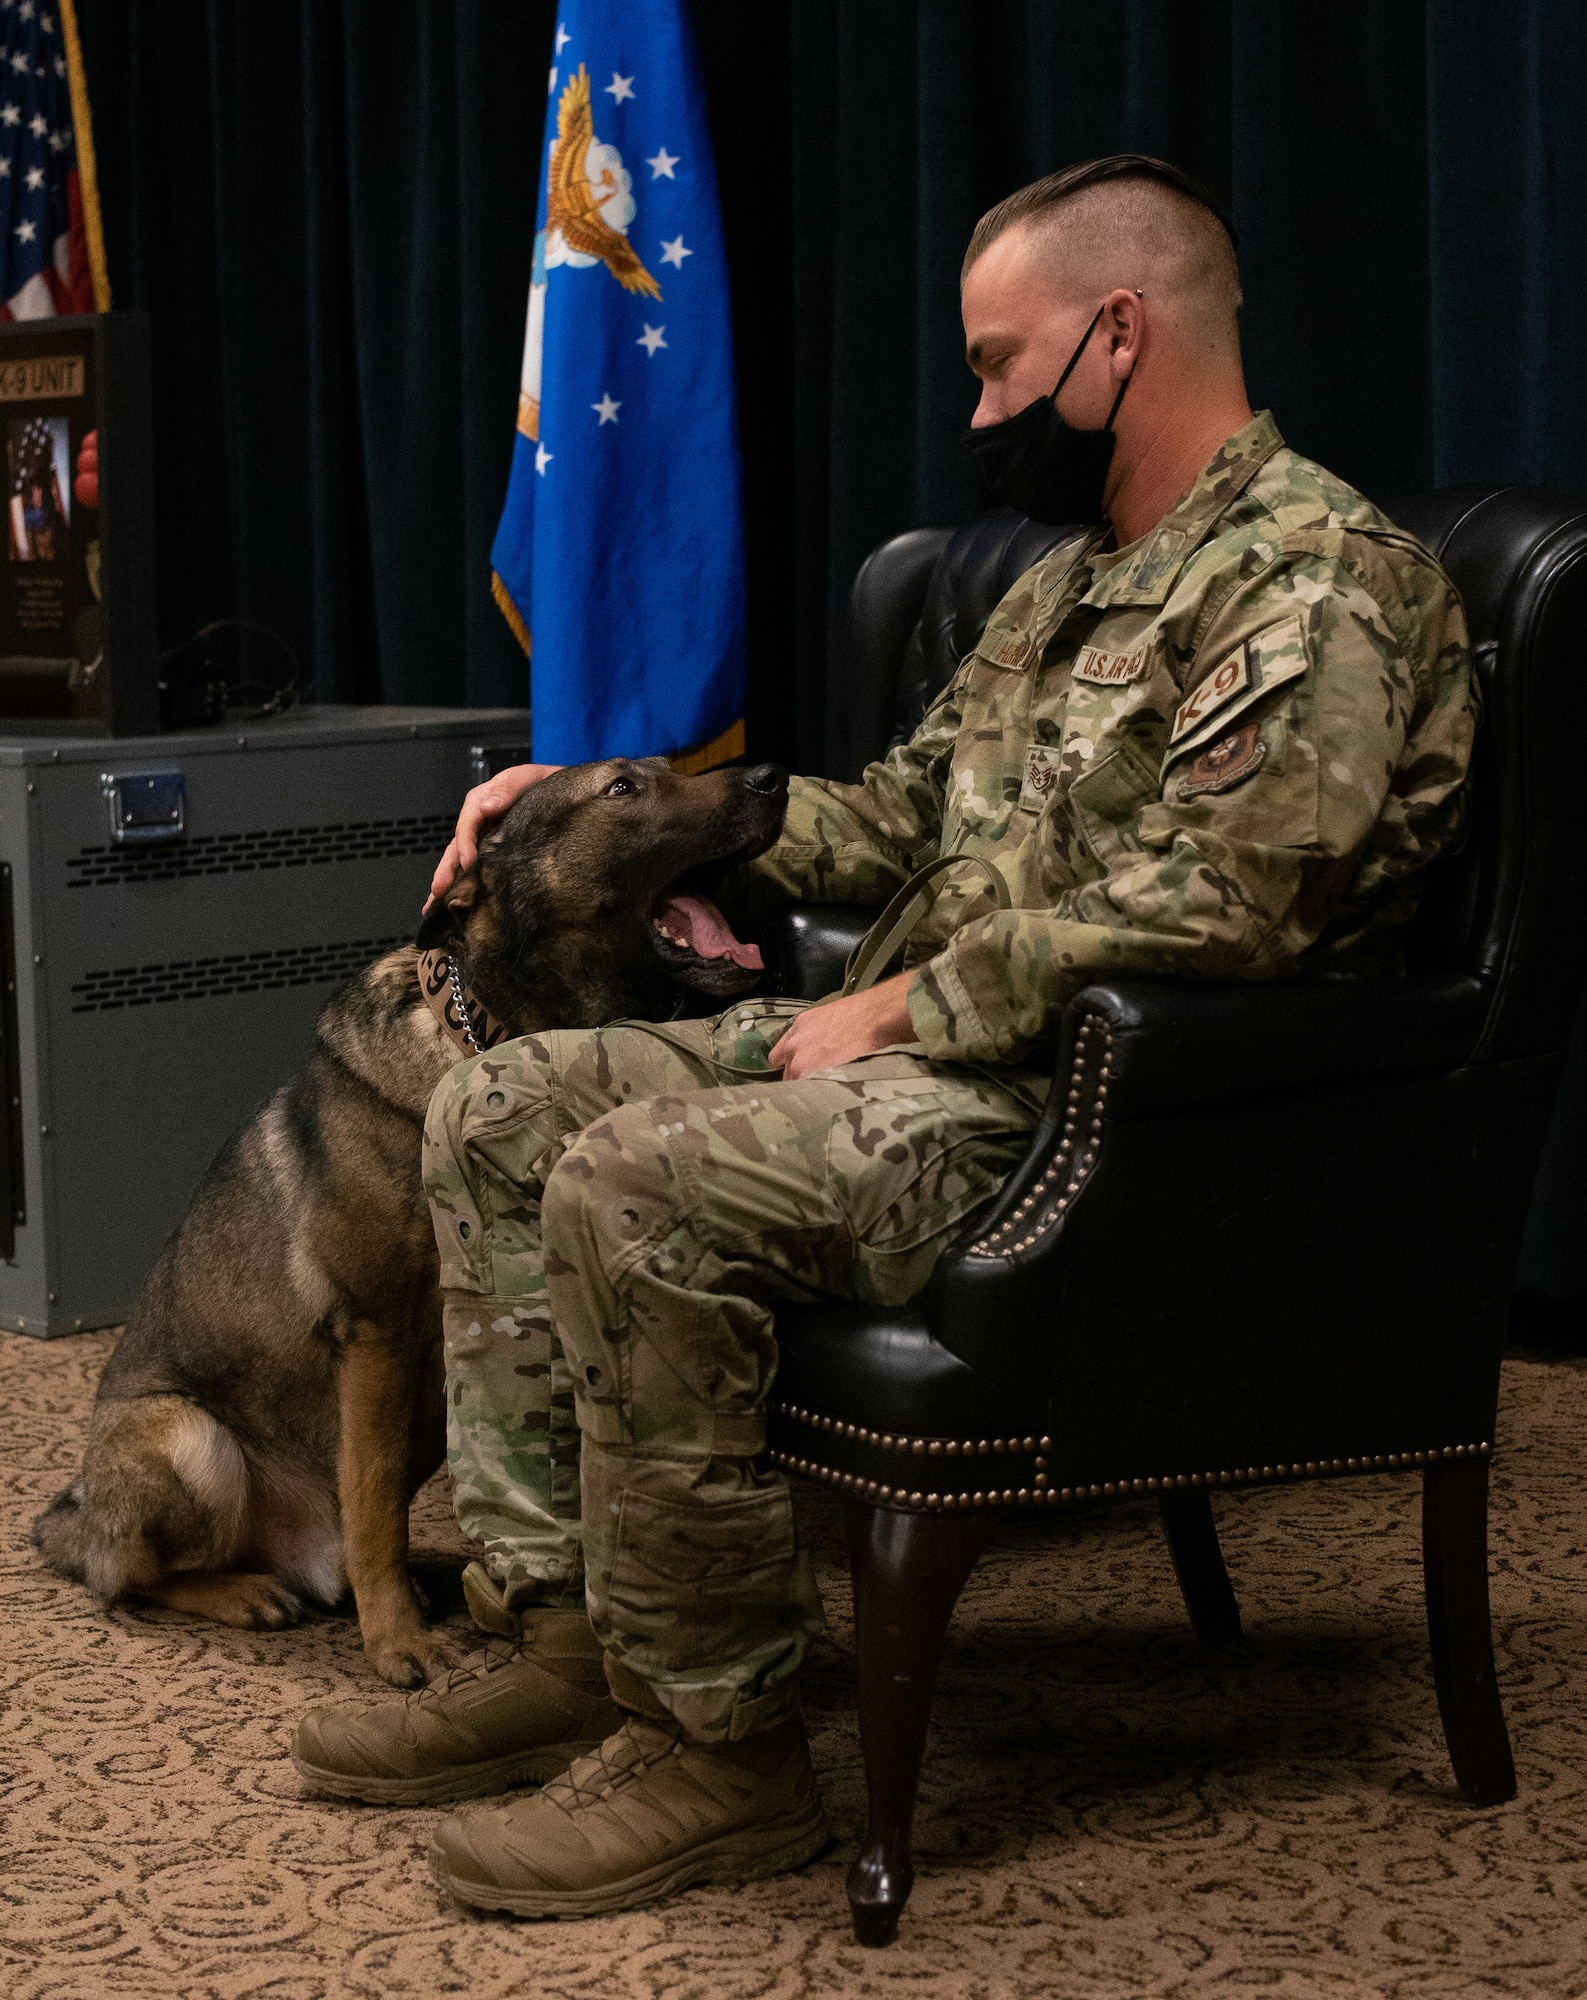 Military Working Dog Fulda W378, 27th Special Operations Security Forces Squadron K-9, looks at his handler and adopter U.S. Staff Sgt. Michael Herman, 27 SOSFS K-9 handler, during Fulda’s retirement ceremony at Cannon AFB, N.M., Nov 16, 2021. MWD Fulda served 7 years in the U.S. Air Force, most recently with Herman, who has adopted him and will take care of Fulda for the rest of his days. (U.S. Air Force photo by Senior Airman Christopher Storer)